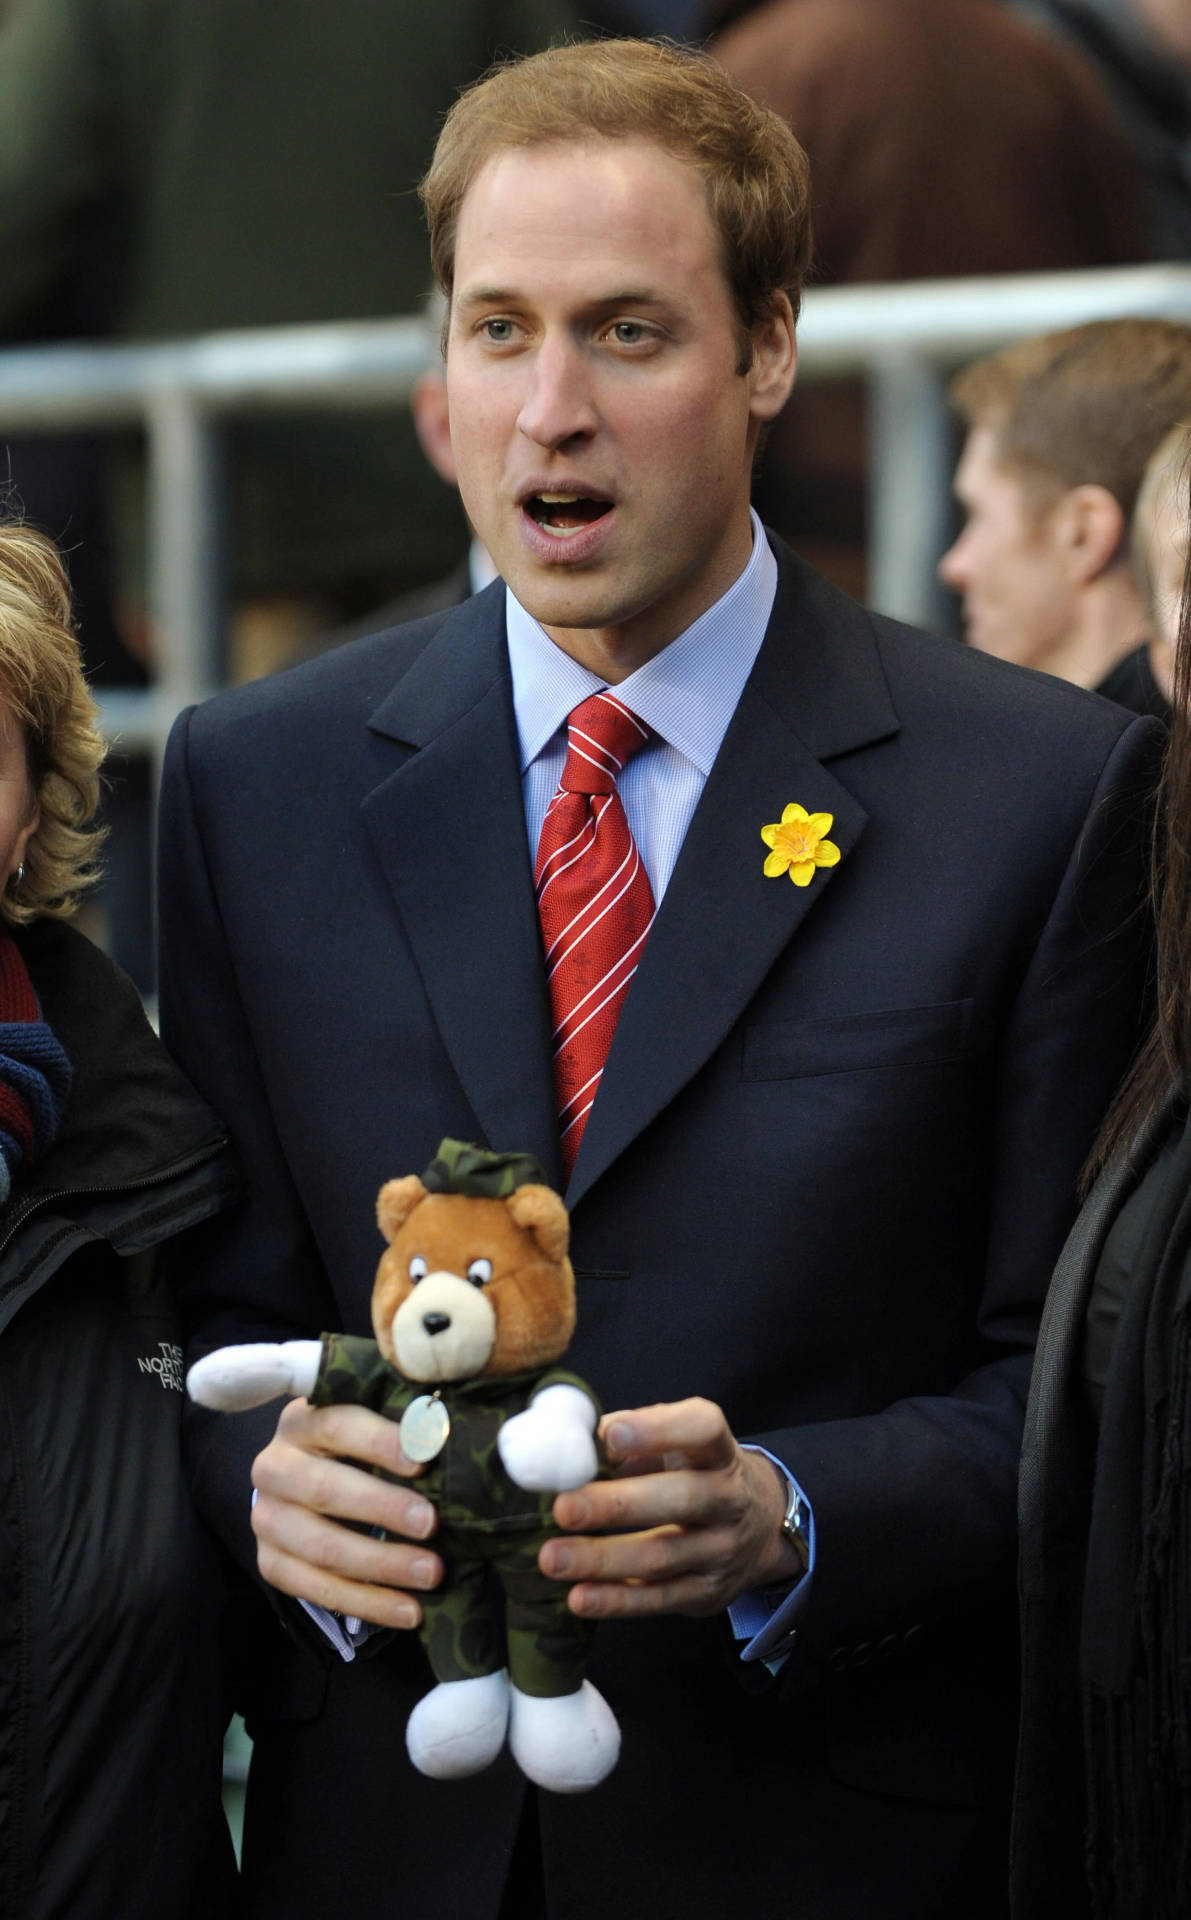 Prince William Smiling While Holding A Stuffed Toy Background